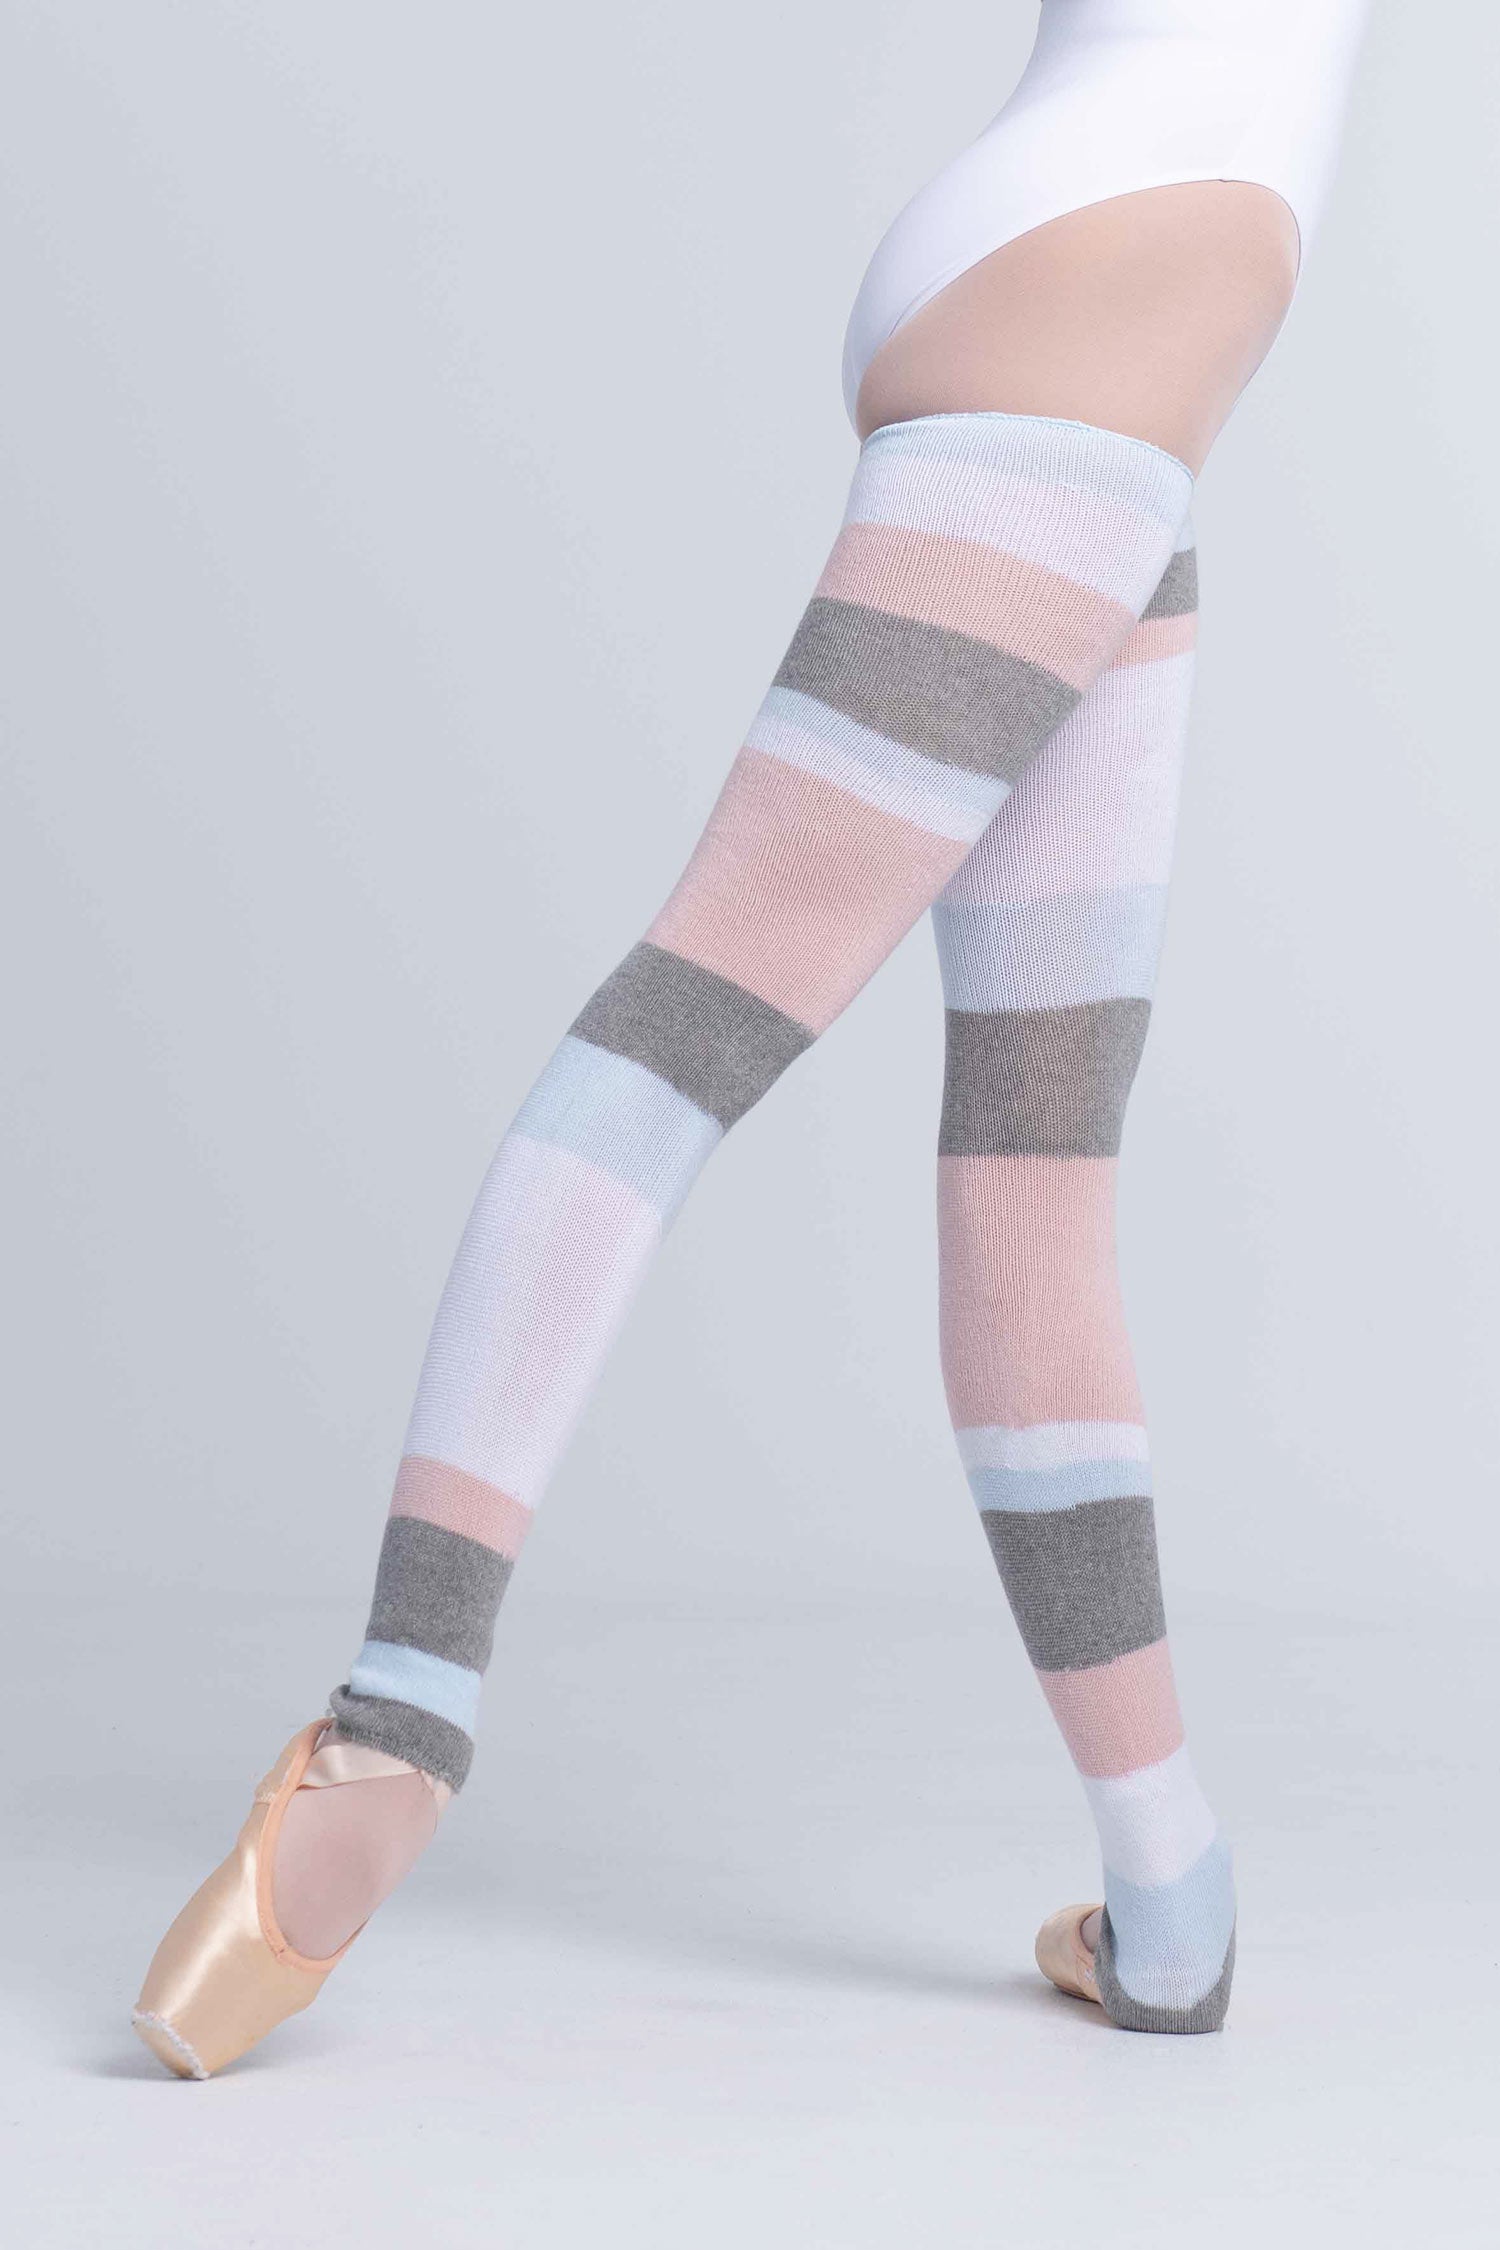 Intermezzo long legwarmers Maxiband in grey, blue and pink from The Collective Dancewear